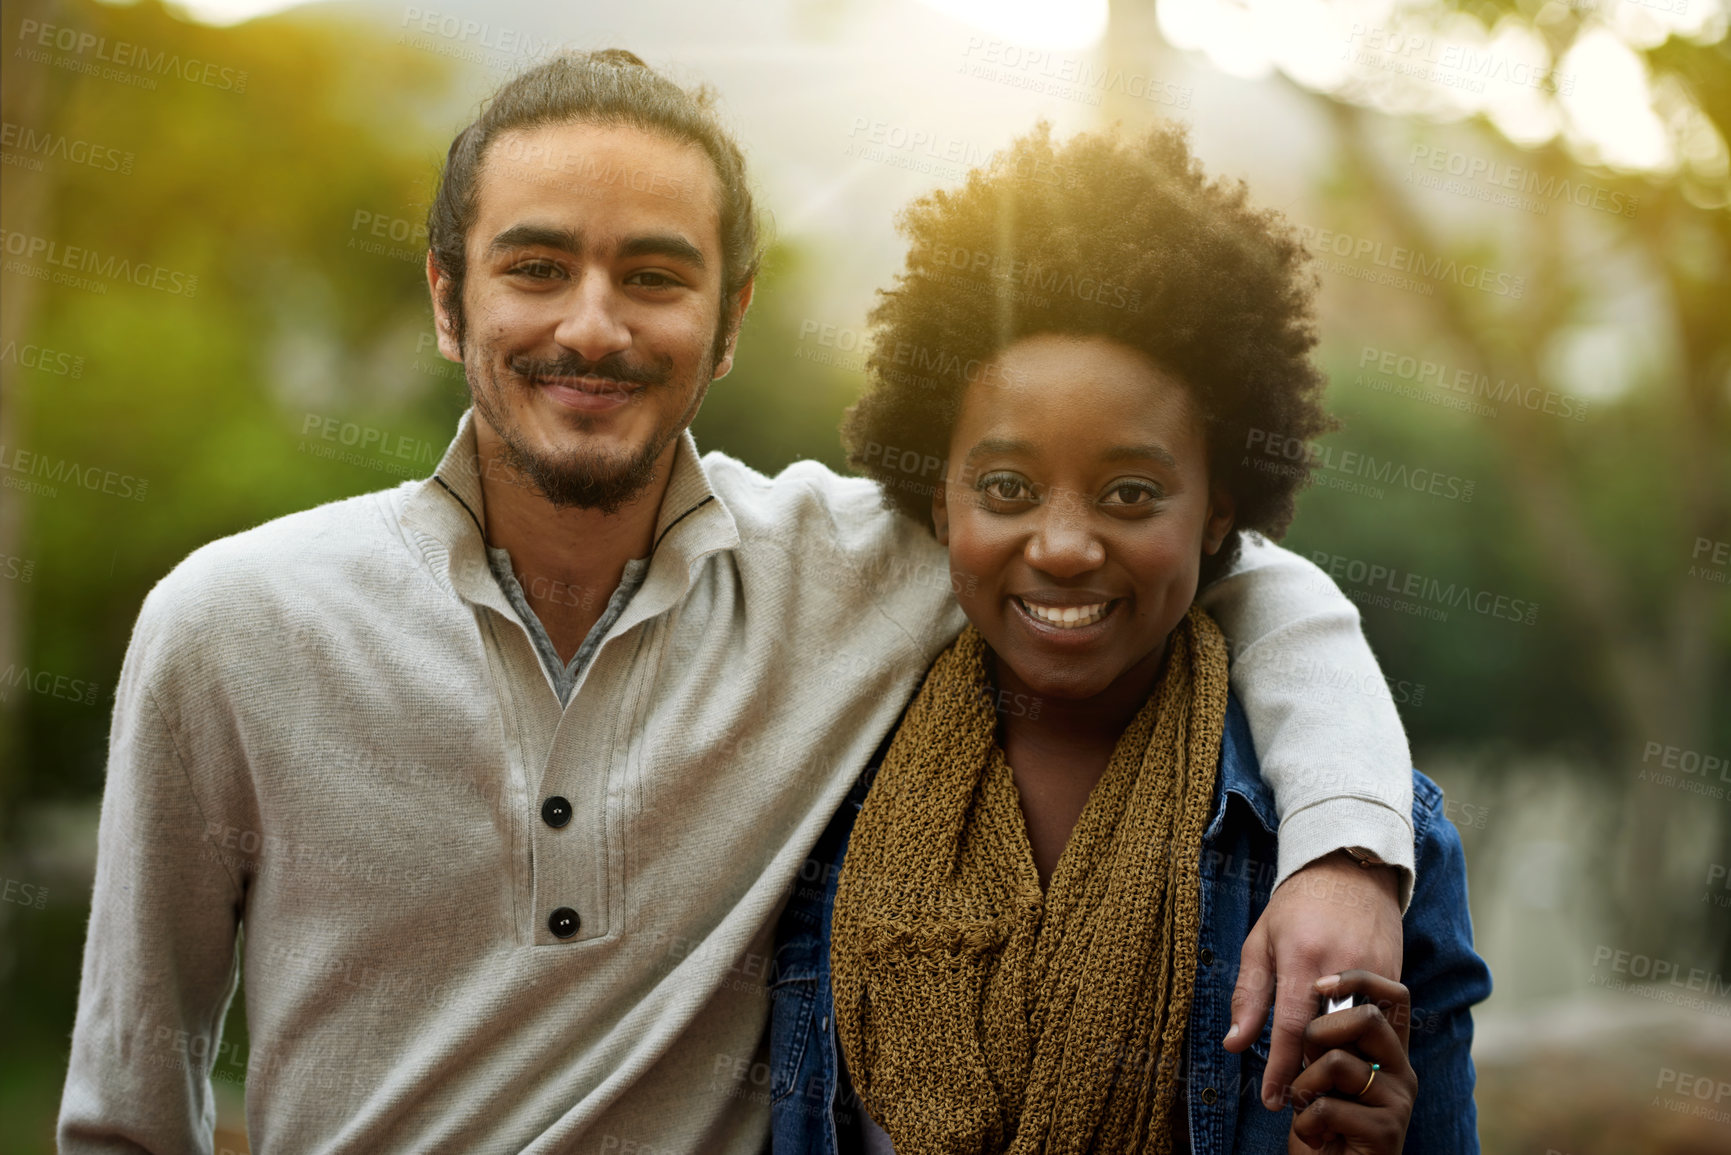 Buy stock photo Park, portrait and happy interracial couple together with trees, sunshine and morning embrace with love. Romance, smile and date in nature, man and woman hug with diversity, connection and care.